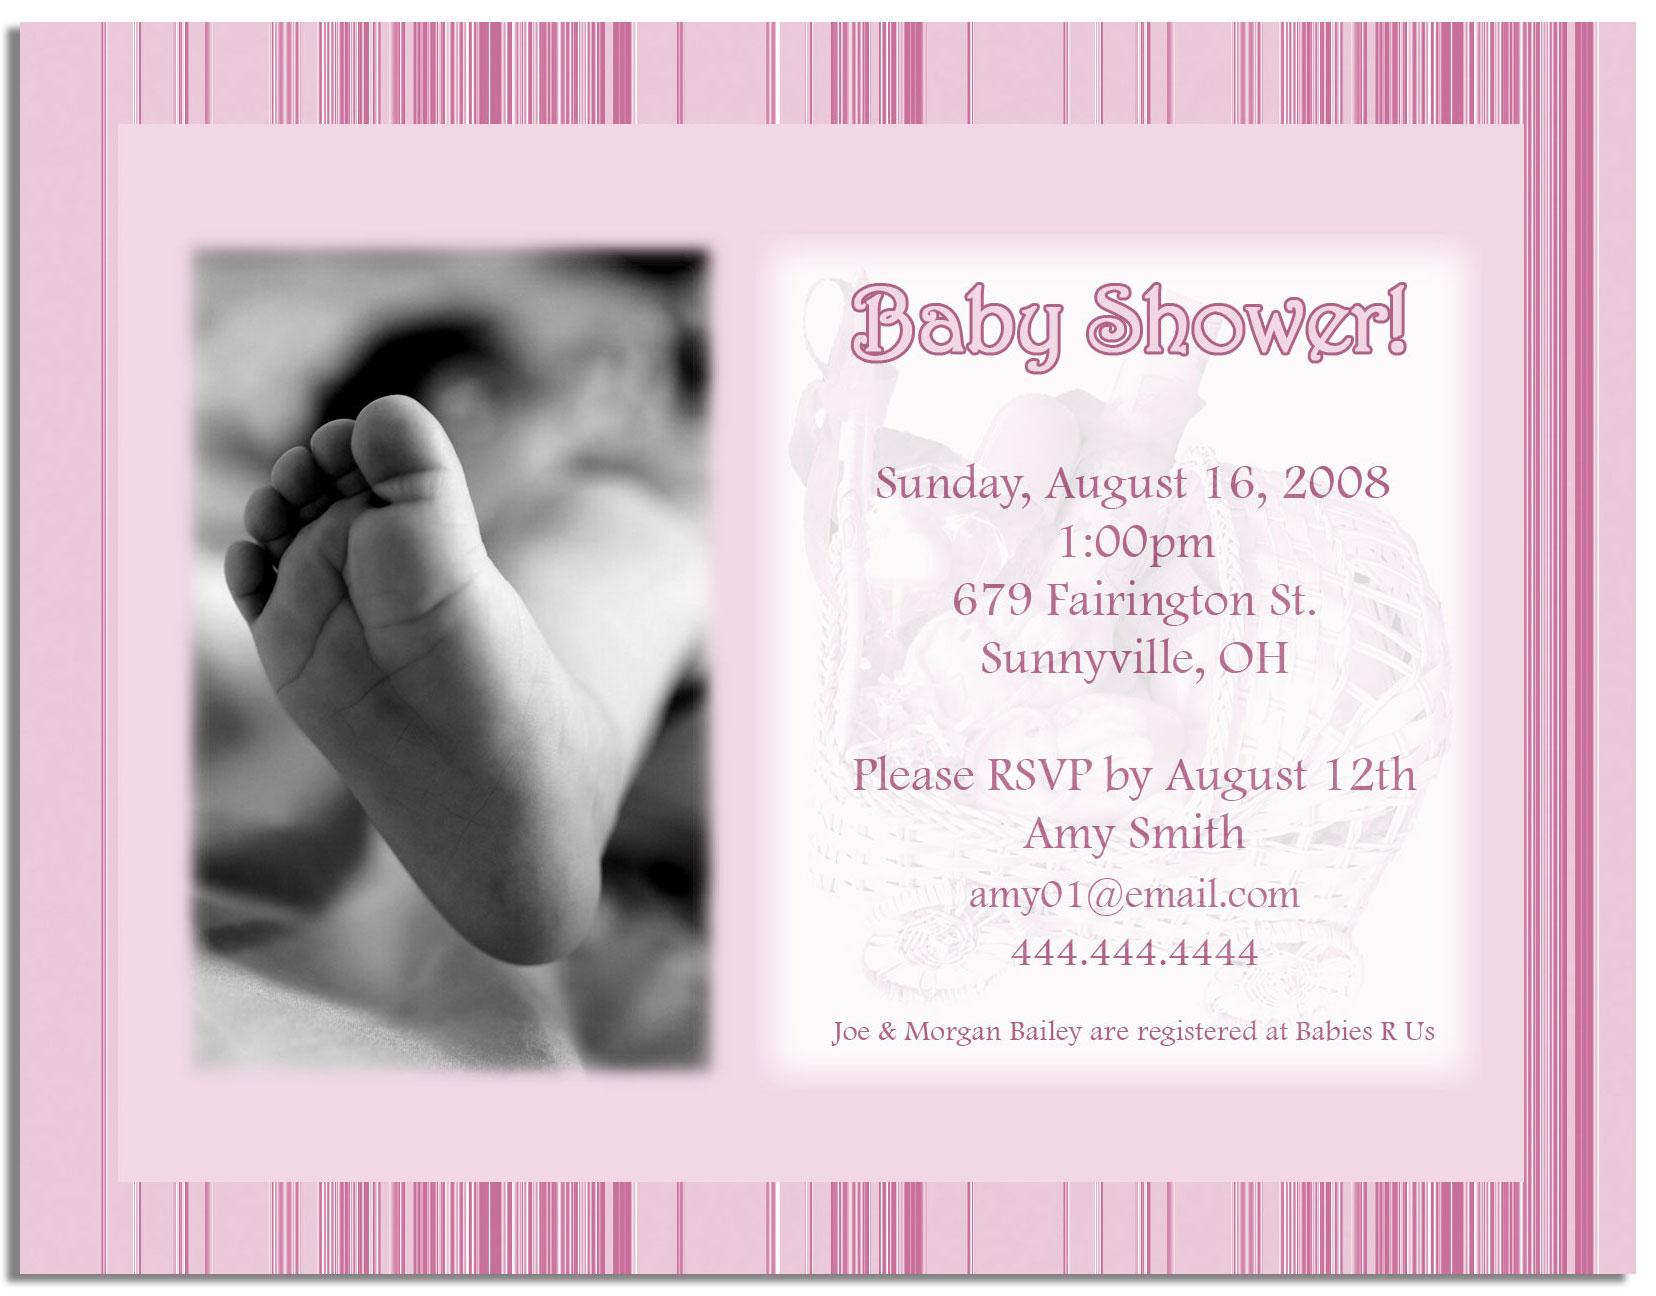 Photo Printable Ba Shower Invitations Image within proportions 1656 X 1296